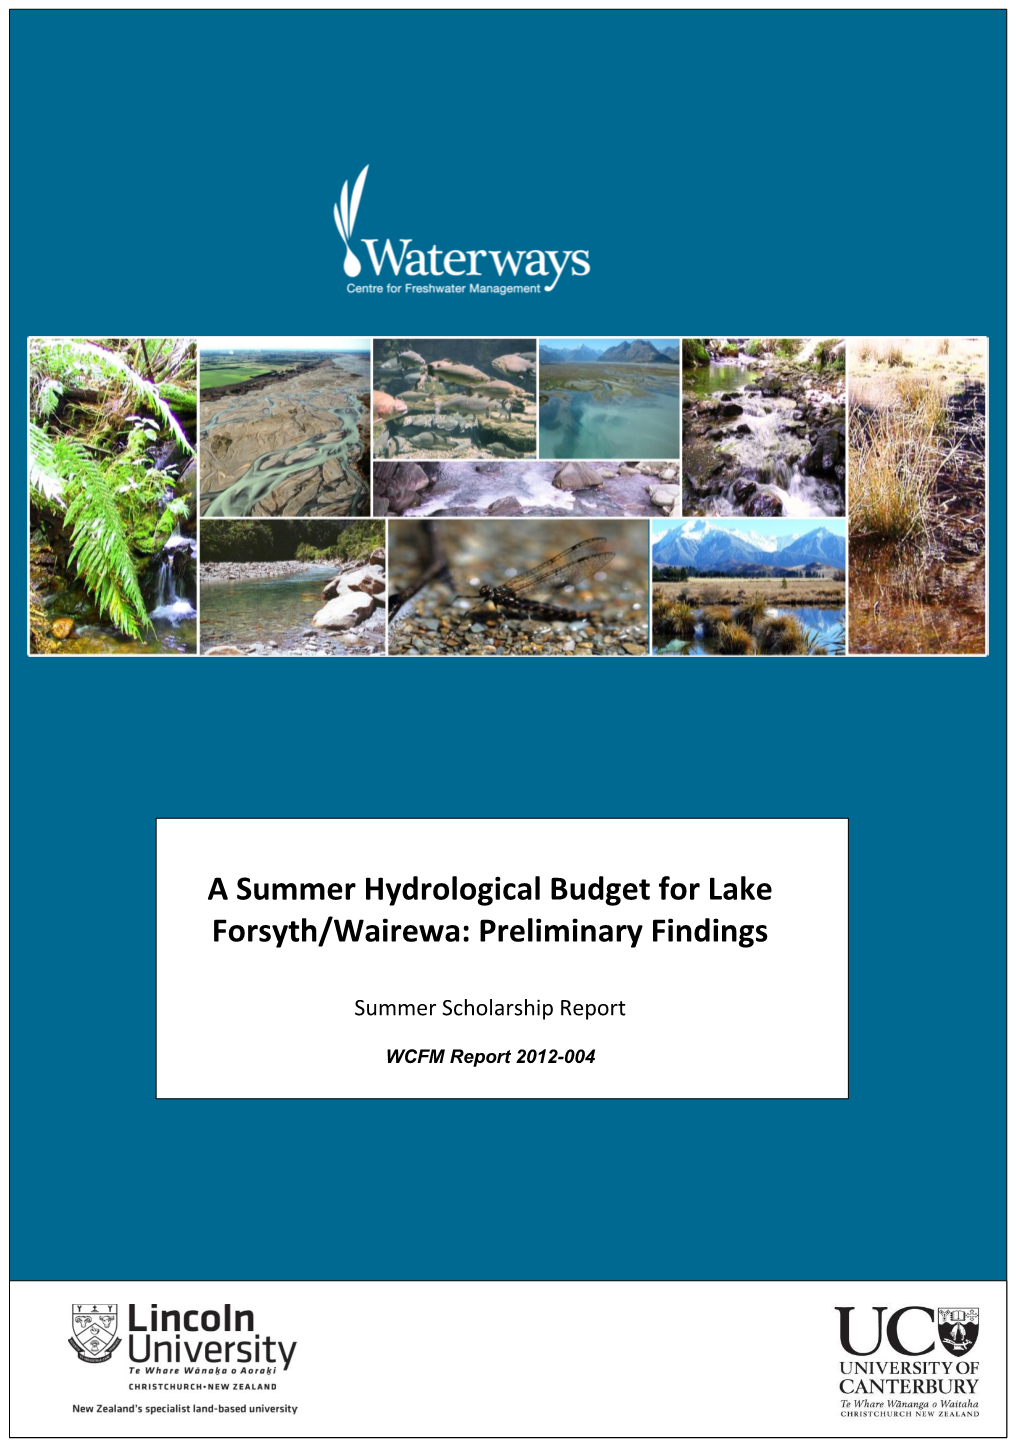 A Summer Hydrological Budget for Lake Forsyth/Wairewa: Preliminary Findings